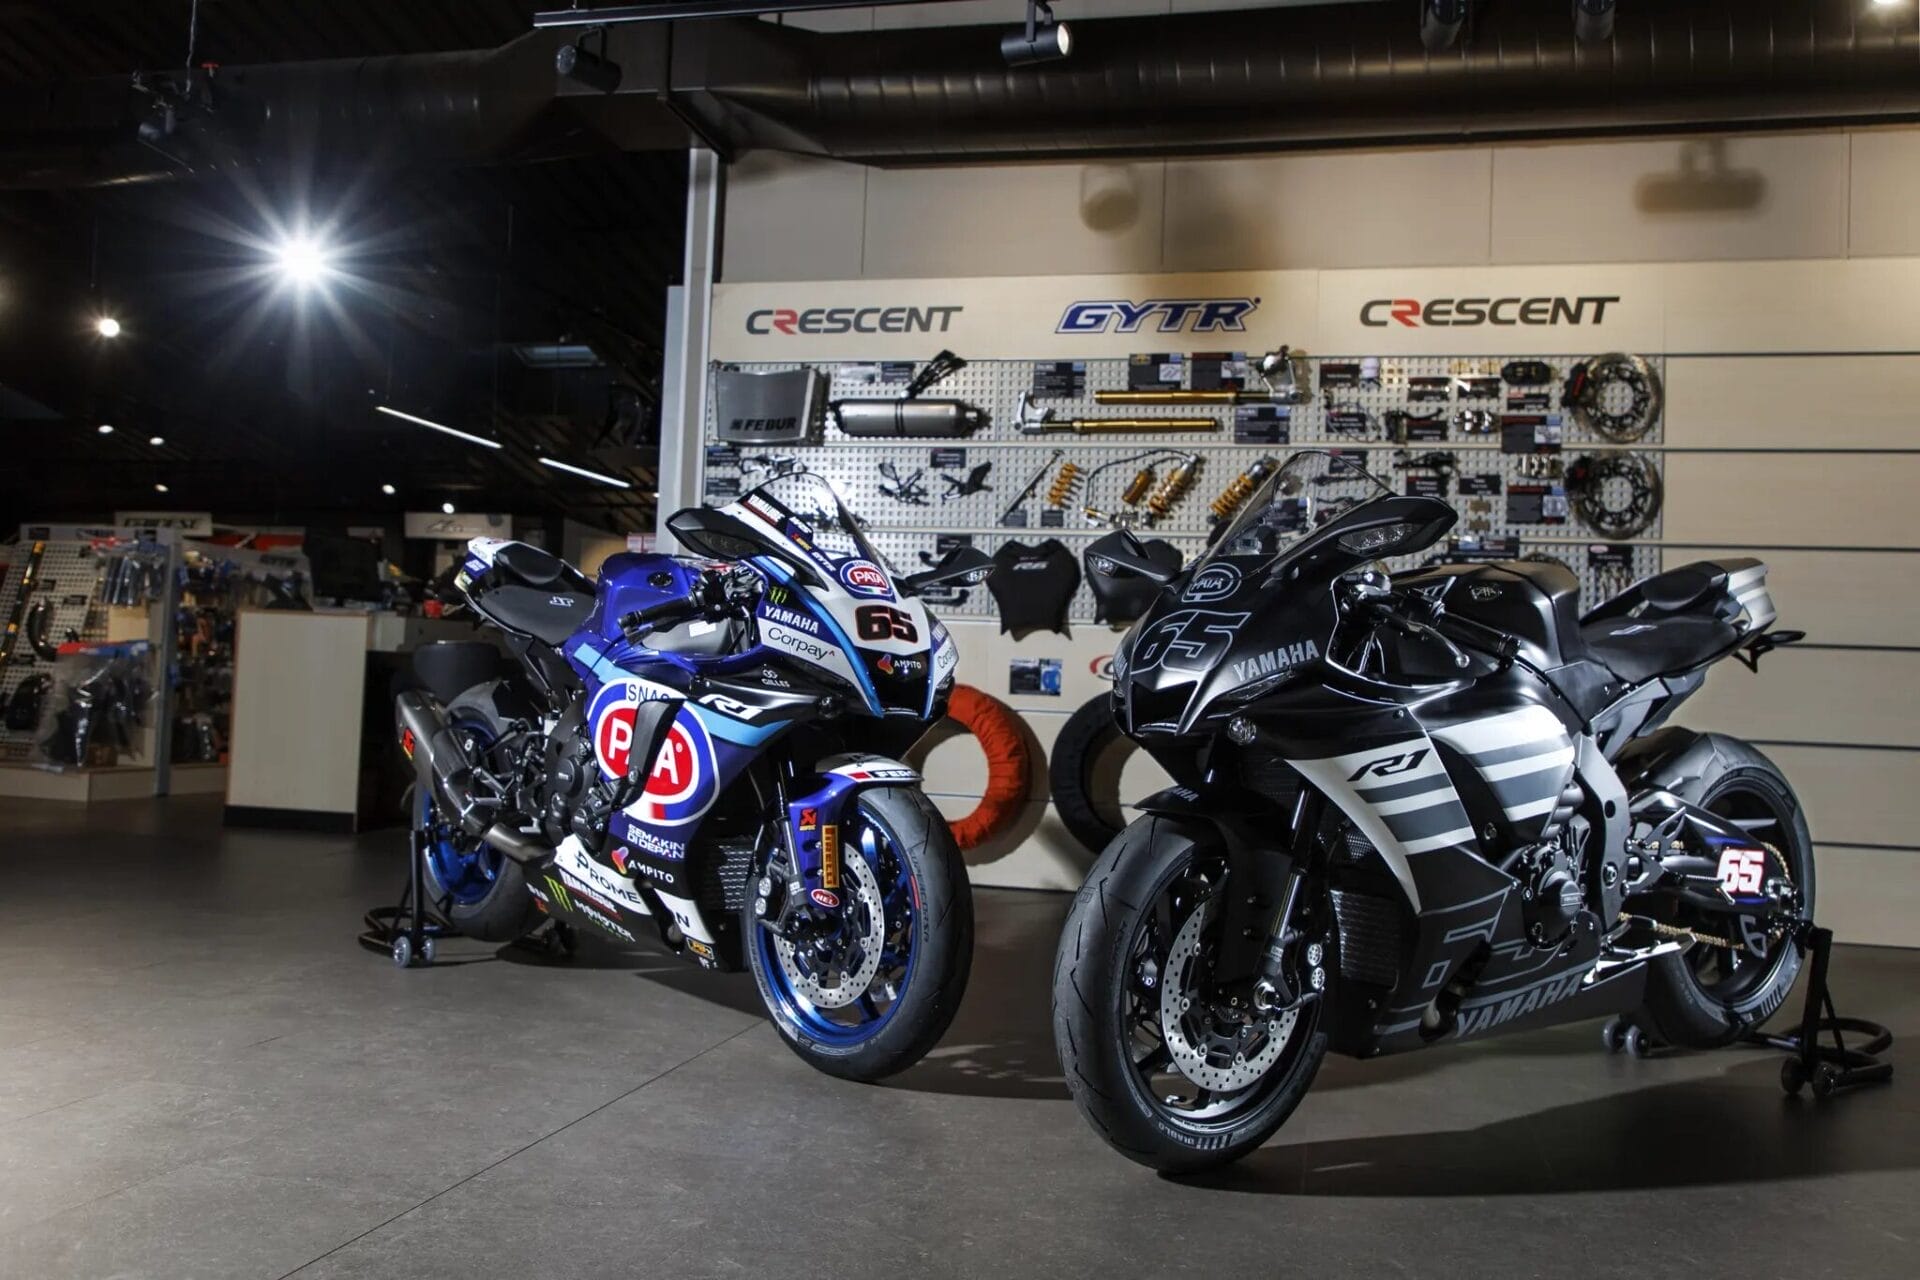 Yamaha YZF-R1: Farewell and homage in the form of the Jonathan Rea replica